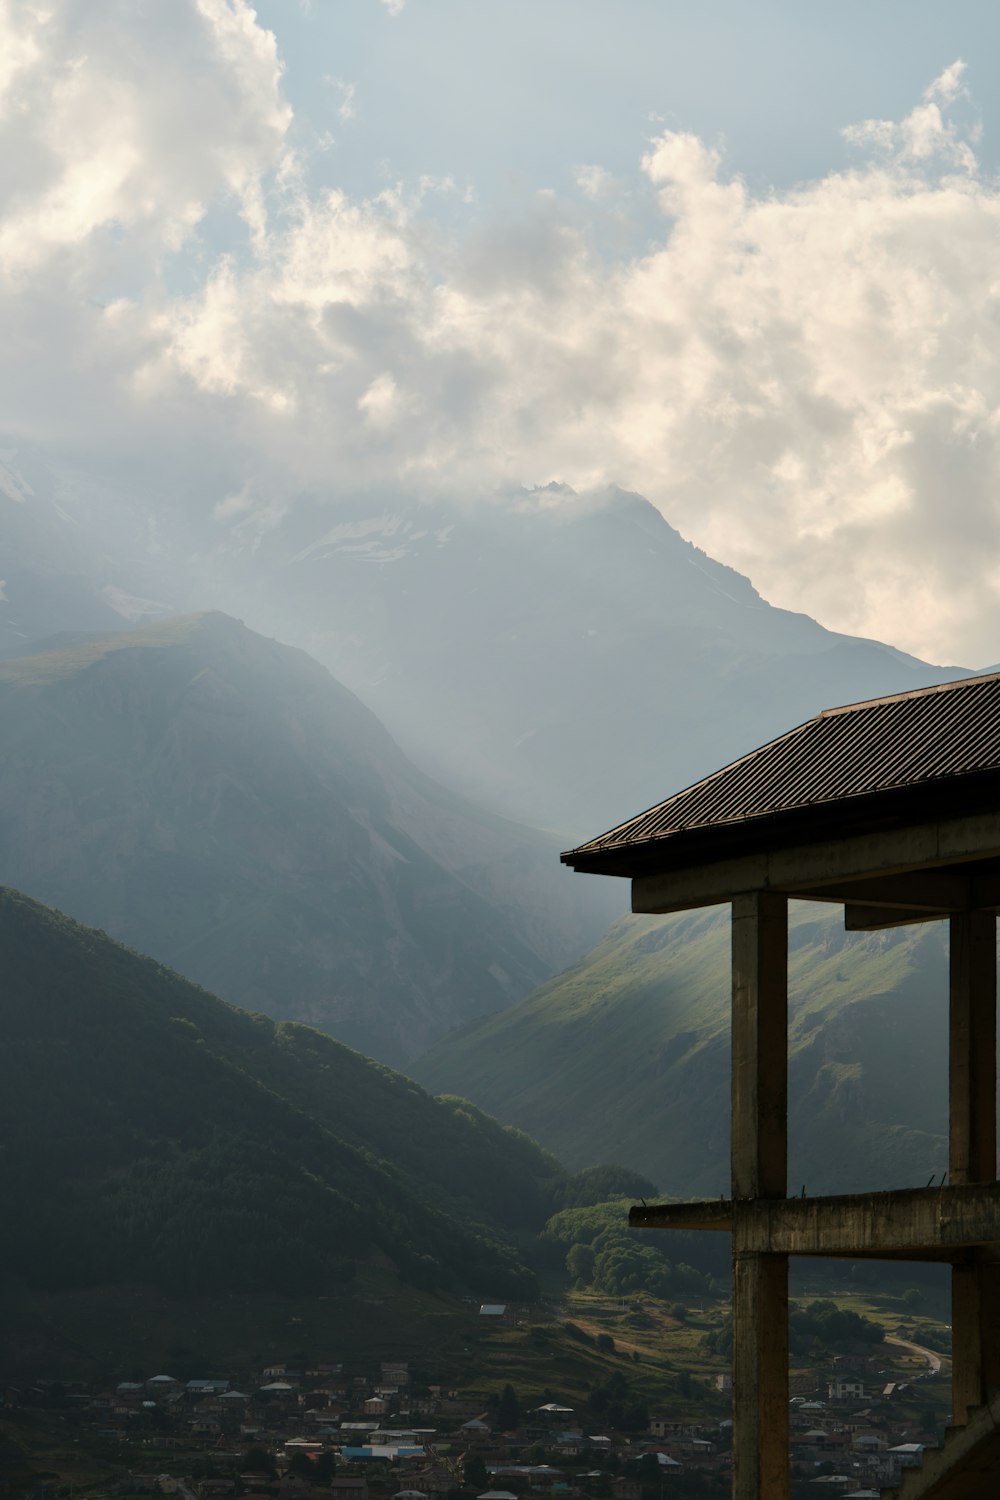 a view of a mountain range with a wooden structure in the foreground